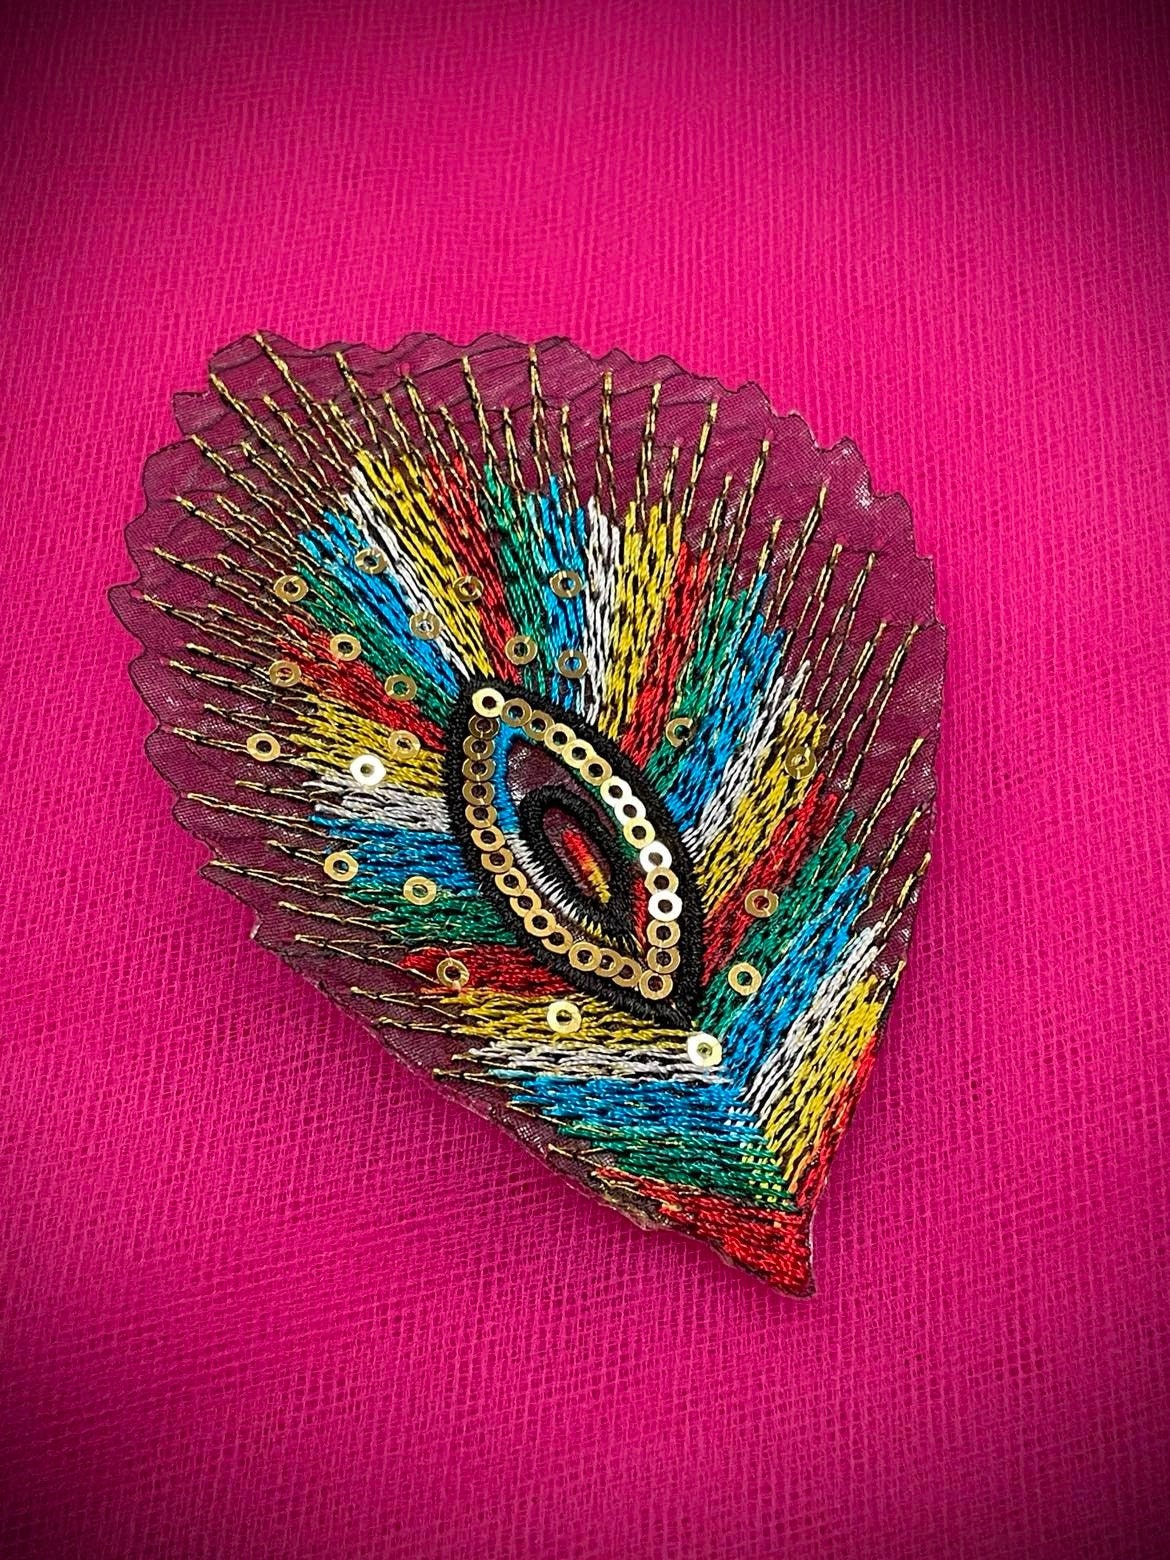 Rainbow Sequin Feather Peacock Sew Iron On Patches Embroidered Applique DIY Gift